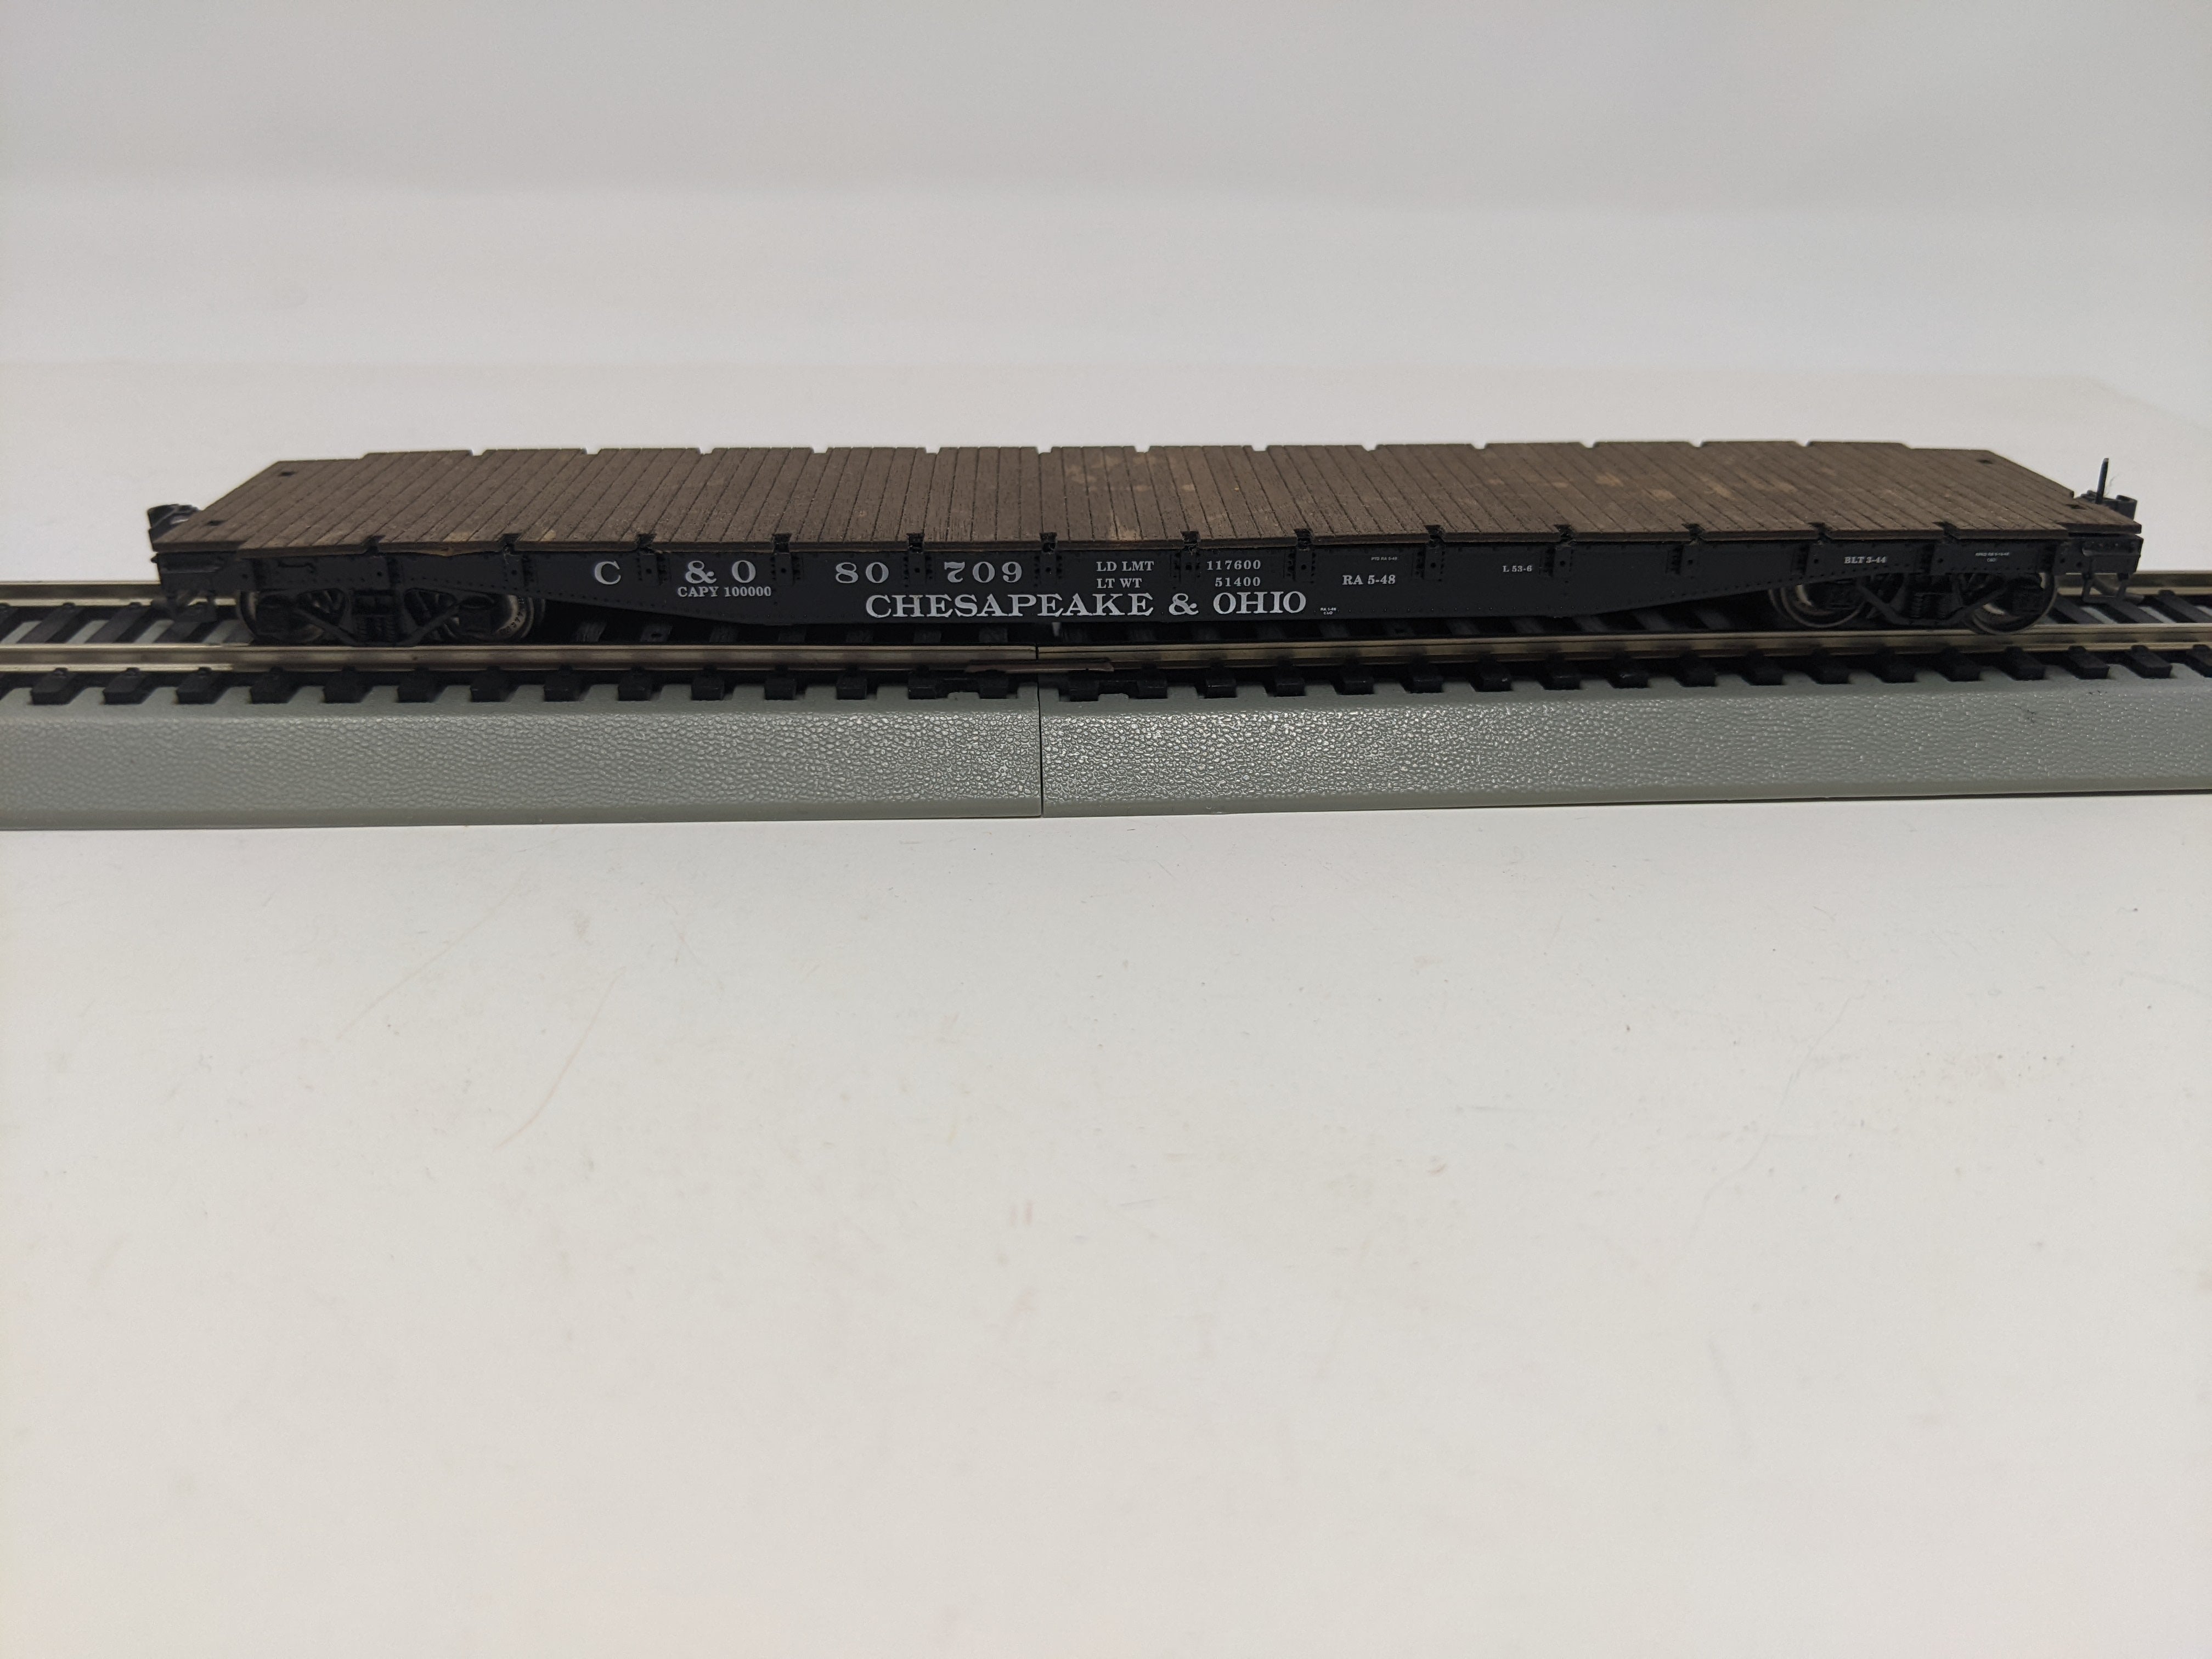 USED HO Scale, 55' Flat Car with Wood Deck, Chesapeake and Ohio C&O #80709, Read Description